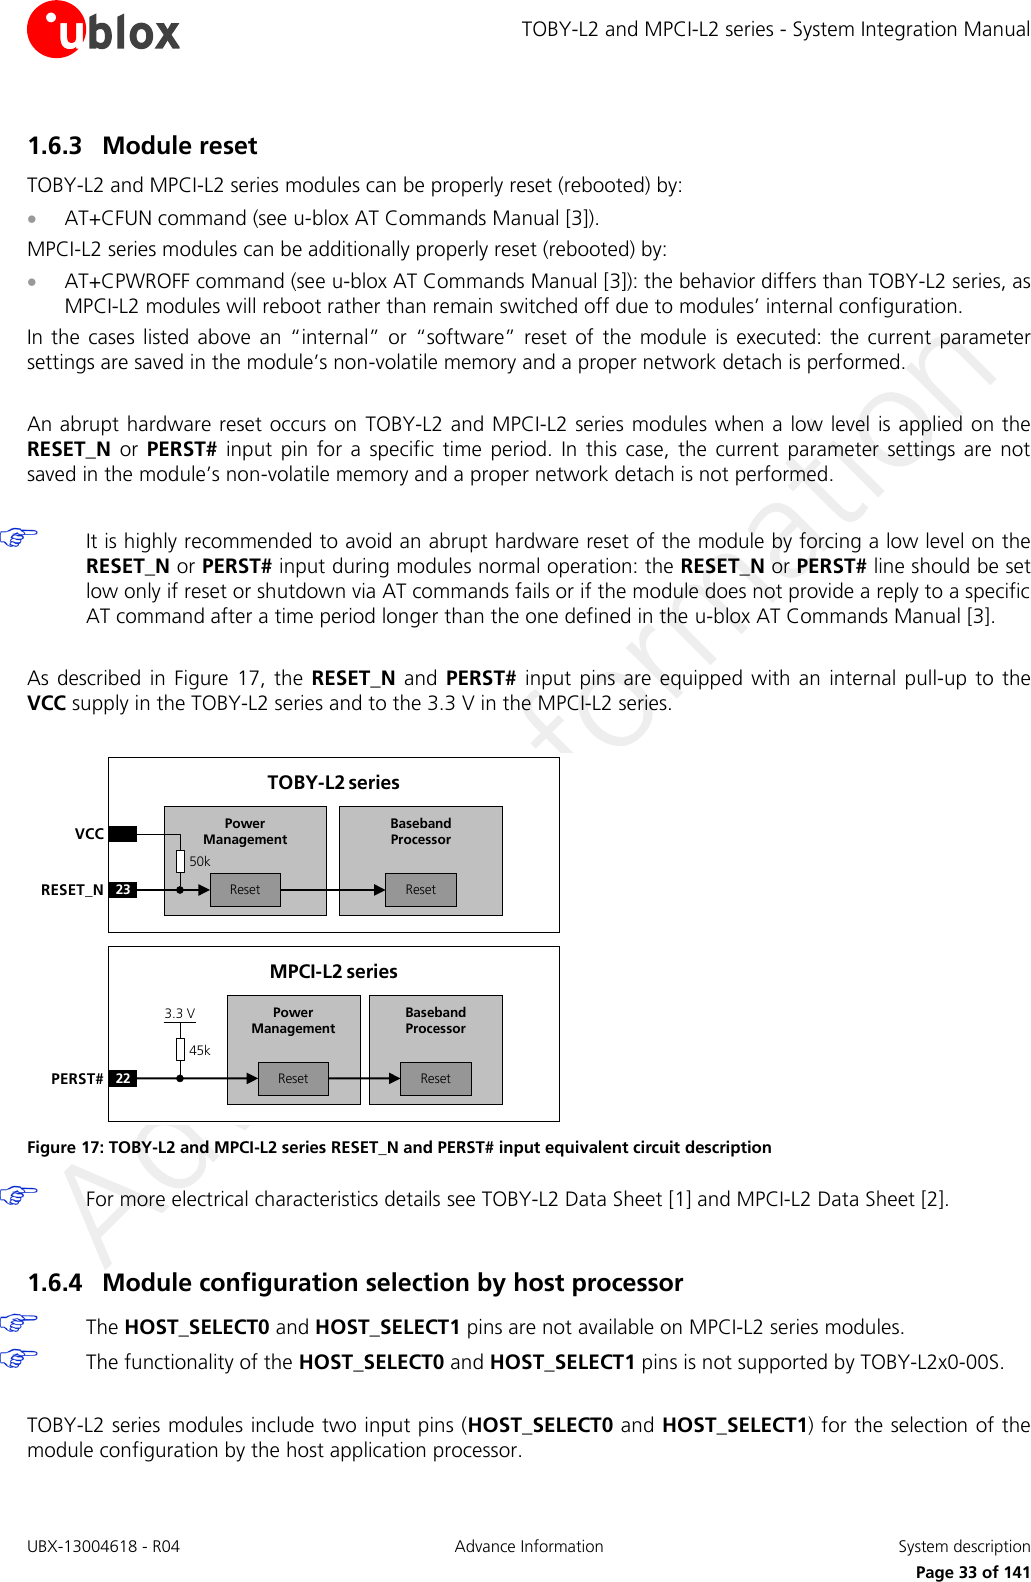 TOBY-L2 and MPCI-L2 series - System Integration Manual UBX-13004618 - R04  Advance Information  System description     Page 33 of 141 1.6.3 Module reset TOBY-L2 and MPCI-L2 series modules can be properly reset (rebooted) by:  AT+CFUN command (see u-blox AT Commands Manual [3]). MPCI-L2 series modules can be additionally properly reset (rebooted) by:  AT+CPWROFF command (see u-blox AT Commands Manual [3]): the behavior differs than TOBY-L2 series, as MPCI-L2 modules will reboot rather than remain switched off due to modules’ internal configuration. In the  cases listed  above  an  “internal”  or  “software”  reset of  the  module  is  executed:  the  current  parameter settings are saved in the module’s non-volatile memory and a proper network detach is performed.  An abrupt hardware reset occurs on  TOBY-L2 and MPCI-L2 series modules when a low level is applied on the RESET_N  or  PERST#  input  pin  for  a  specific  time  period.  In this  case,  the  current  parameter  settings are  not saved in the module’s non-volatile memory and a proper network detach is not performed.   It is highly recommended to avoid an abrupt hardware reset of the module by forcing a low level on the RESET_N or PERST# input during modules normal operation: the RESET_N or PERST# line should be set low only if reset or shutdown via AT commands fails or if the module does not provide a reply to a specific AT command after a time period longer than the one defined in the u-blox AT Commands Manual [3].  As described  in  Figure  17,  the  RESET_N  and  PERST#  input pins  are  equipped  with  an  internal  pull-up to the VCC supply in the TOBY-L2 series and to the 3.3 V in the MPCI-L2 series.  Baseband Processor23RESET_NTOBY-L2 seriesVCCResetPower ManagementReset50kBaseband Processor22PERST#MPCI-L2 seriesResetPower ManagementReset45k3.3 V Figure 17: TOBY-L2 and MPCI-L2 series RESET_N and PERST# input equivalent circuit description  For more electrical characteristics details see TOBY-L2 Data Sheet [1] and MPCI-L2 Data Sheet [2].  1.6.4 Module configuration selection by host processor  The HOST_SELECT0 and HOST_SELECT1 pins are not available on MPCI-L2 series modules.  The functionality of the HOST_SELECT0 and HOST_SELECT1 pins is not supported by TOBY-L2x0-00S.  TOBY-L2 series modules include two input pins (HOST_SELECT0 and HOST_SELECT1) for the selection of the module configuration by the host application processor.  